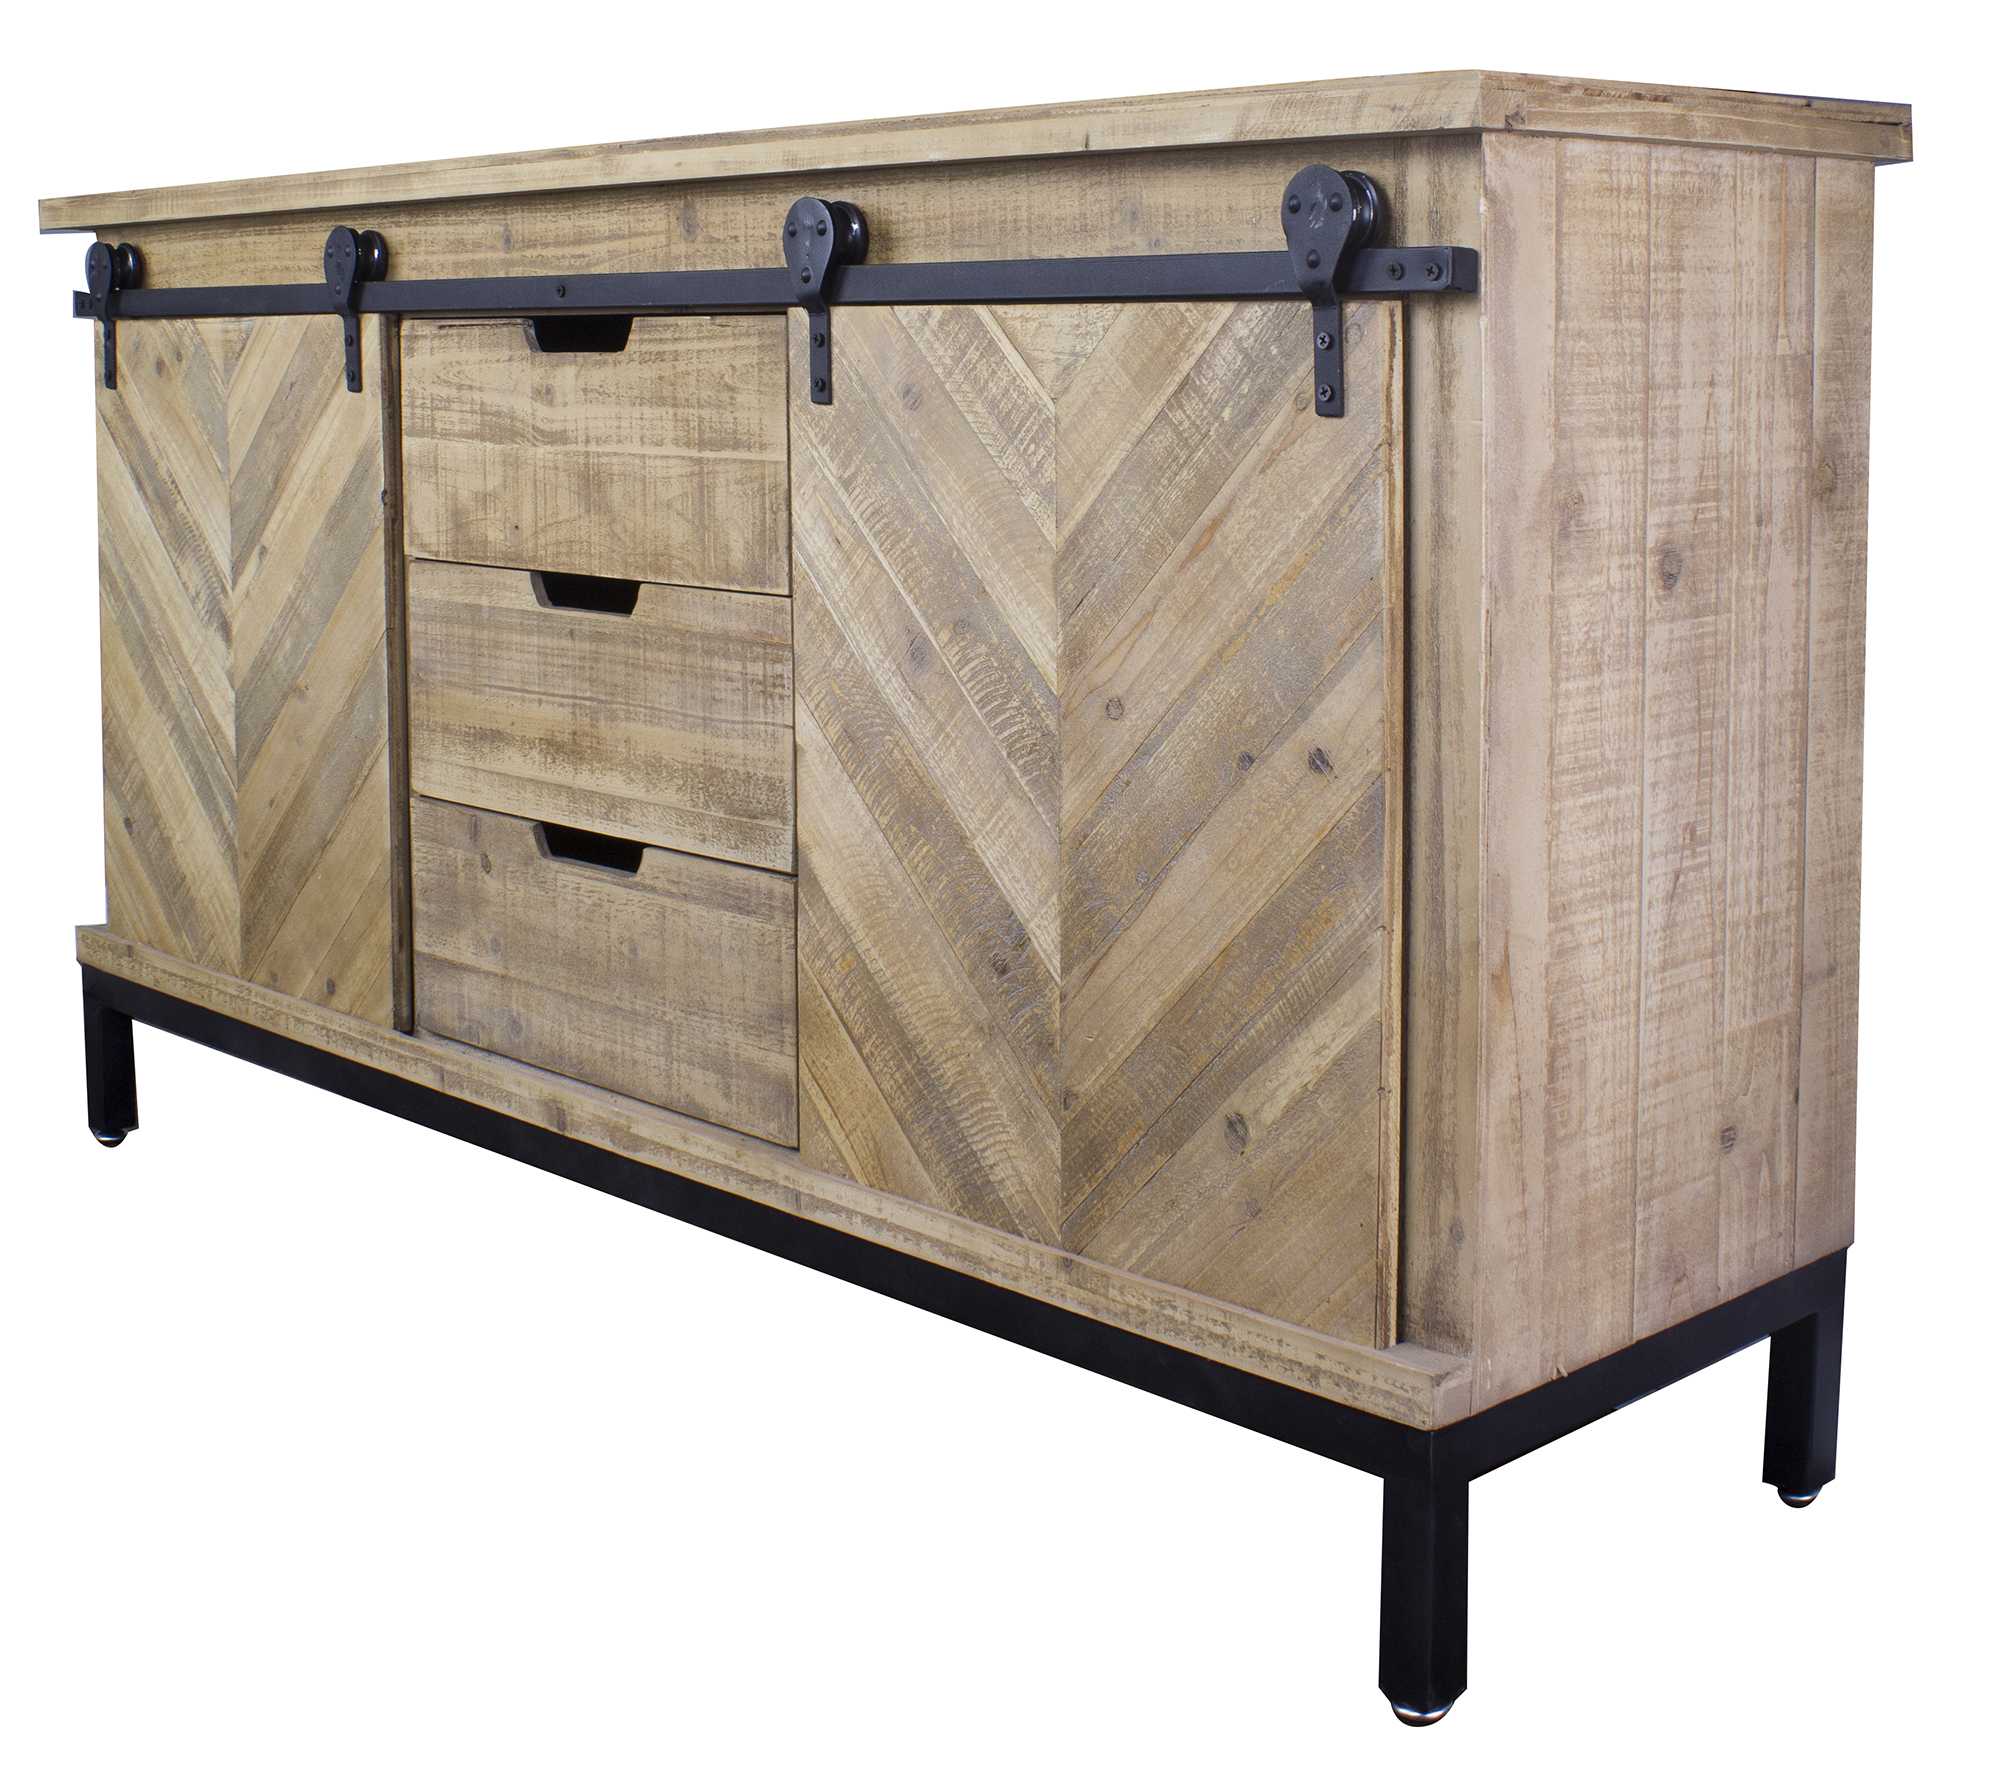 58" X 18" X 33" Natural Wood Iron Wood MDF Buffet Cabinet with Doors and Drawers